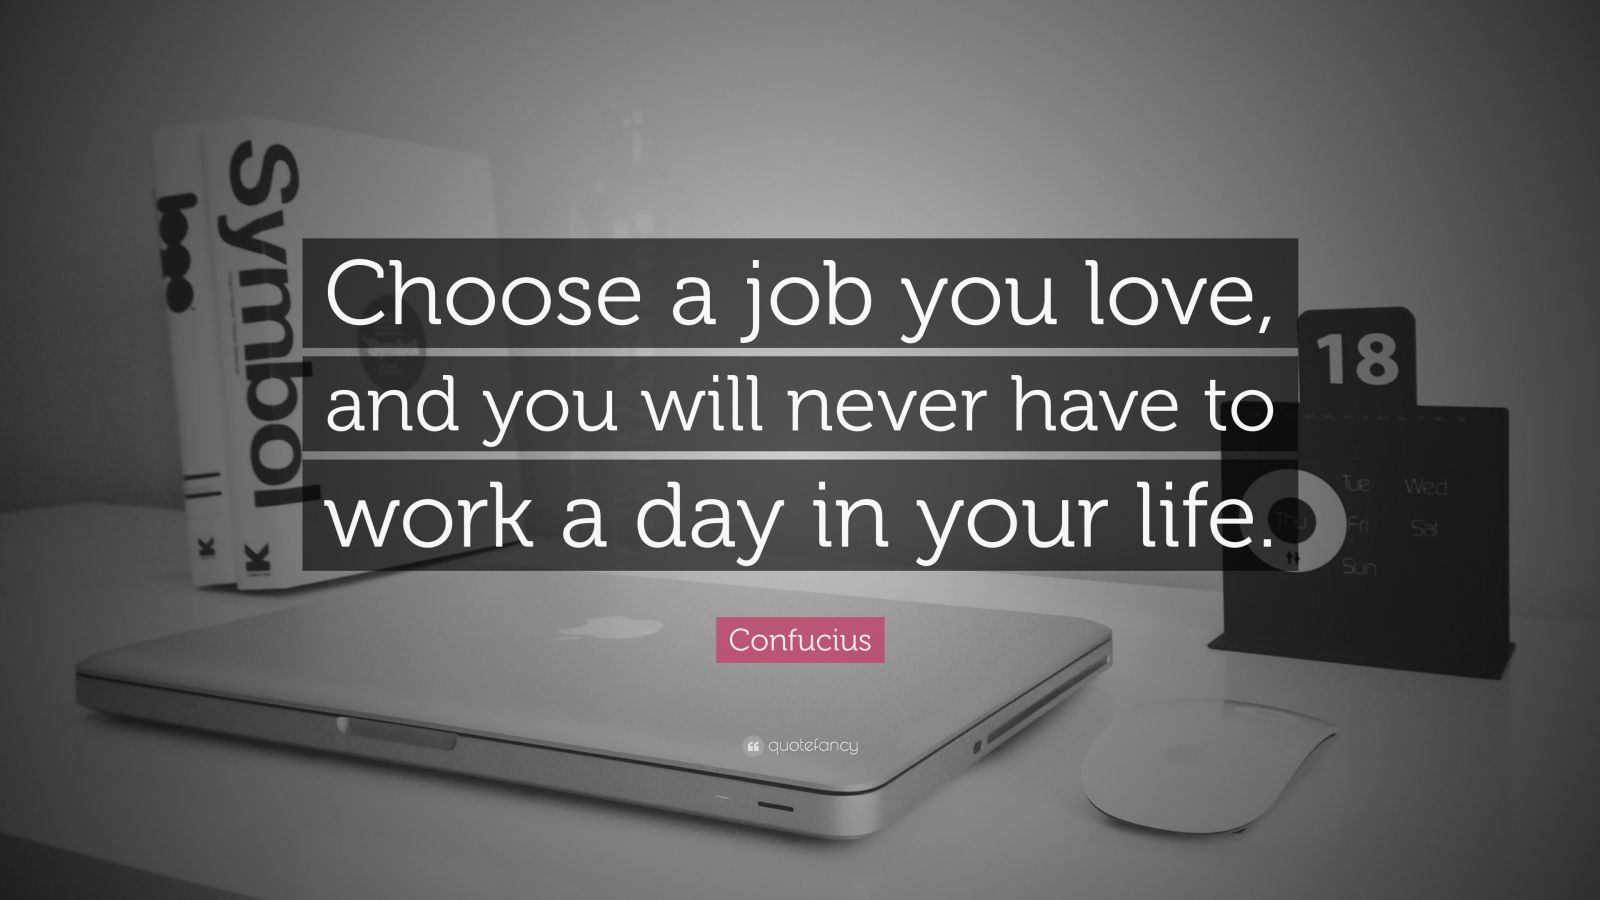 Confucius Quote: “Choose a job you love, and you will never have to